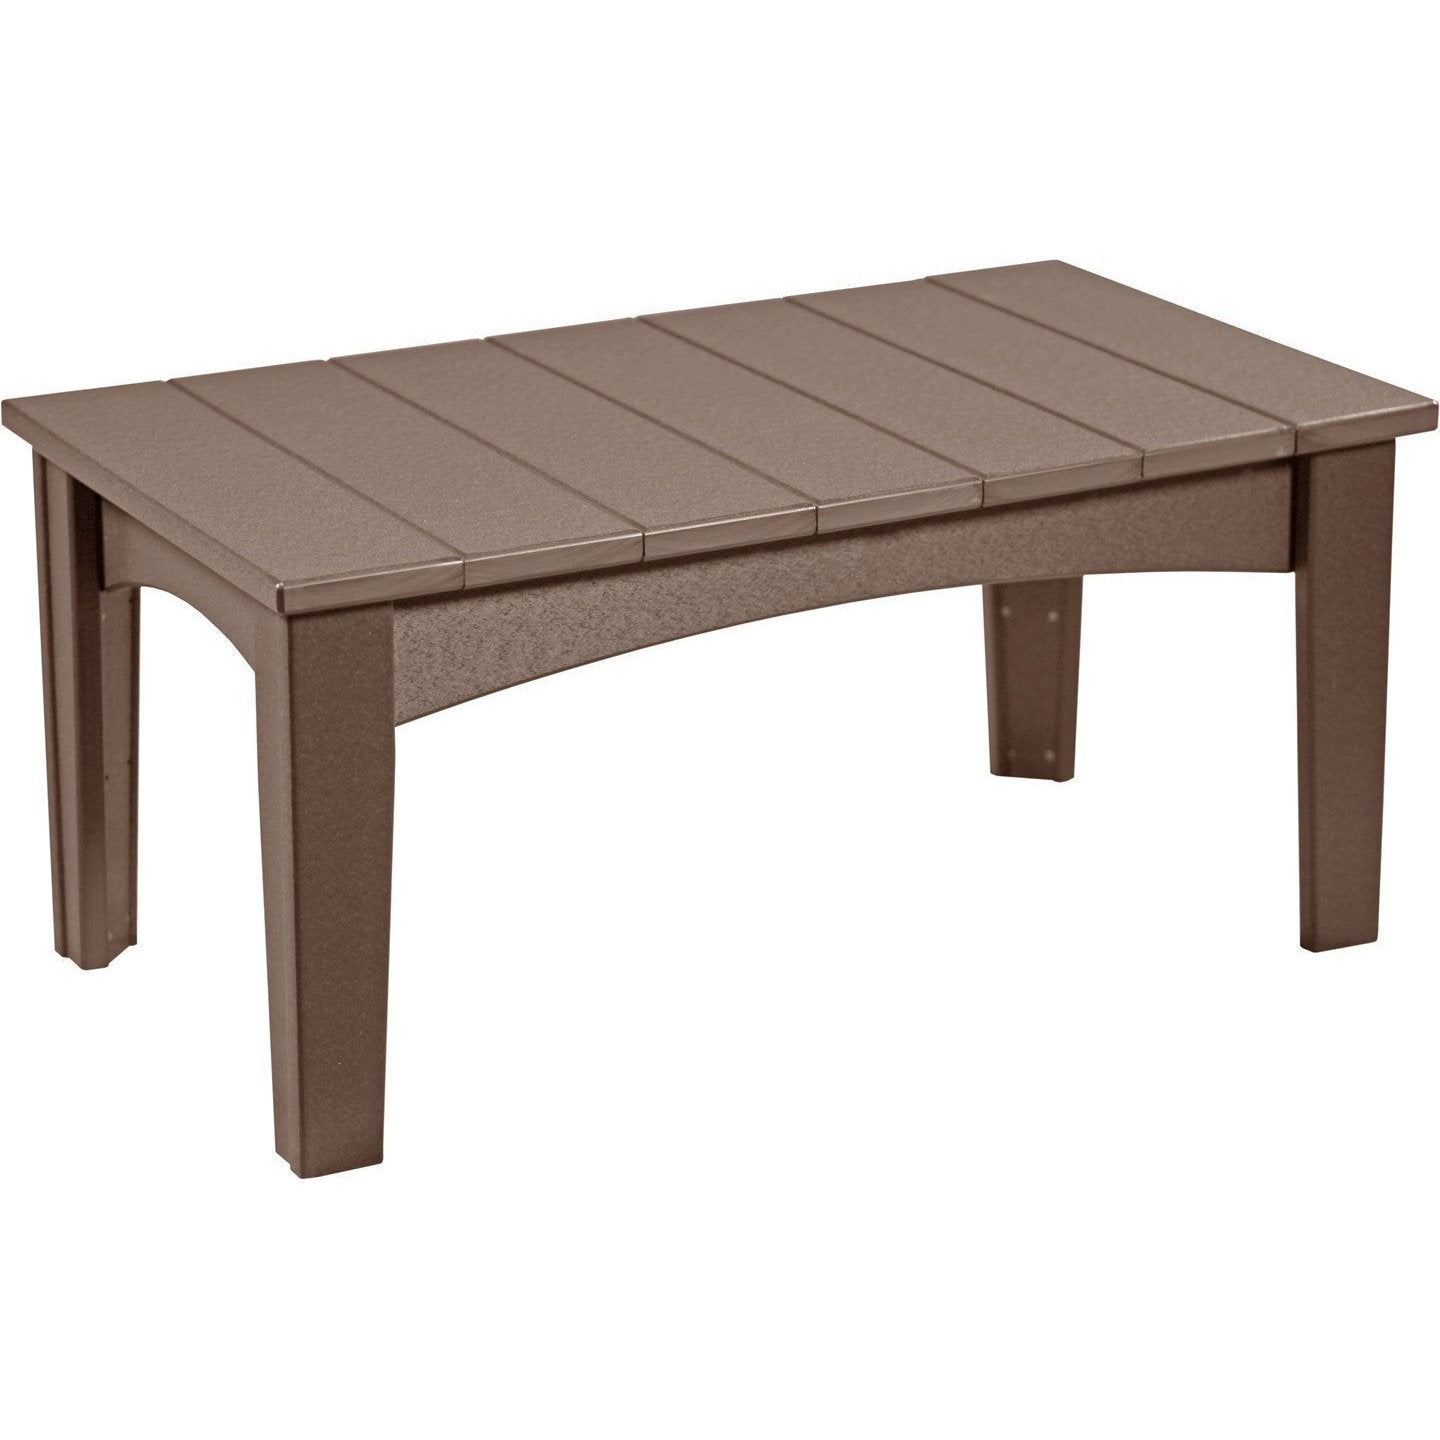 Island Coffee Table Chestnut Brown